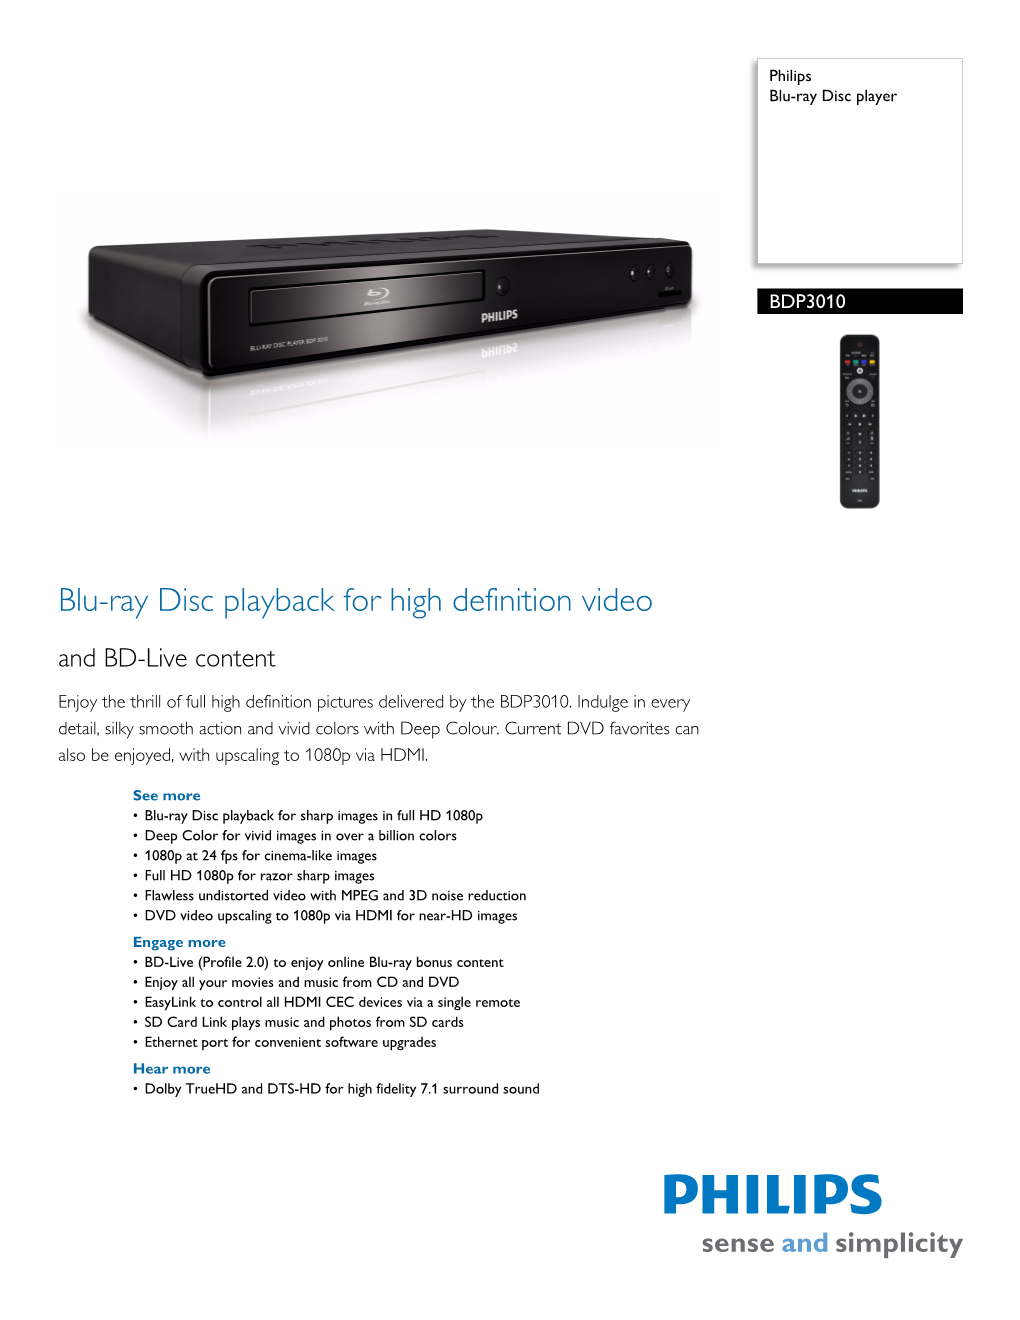 BDP3010/F7 Philips Blu-Ray Disc Player